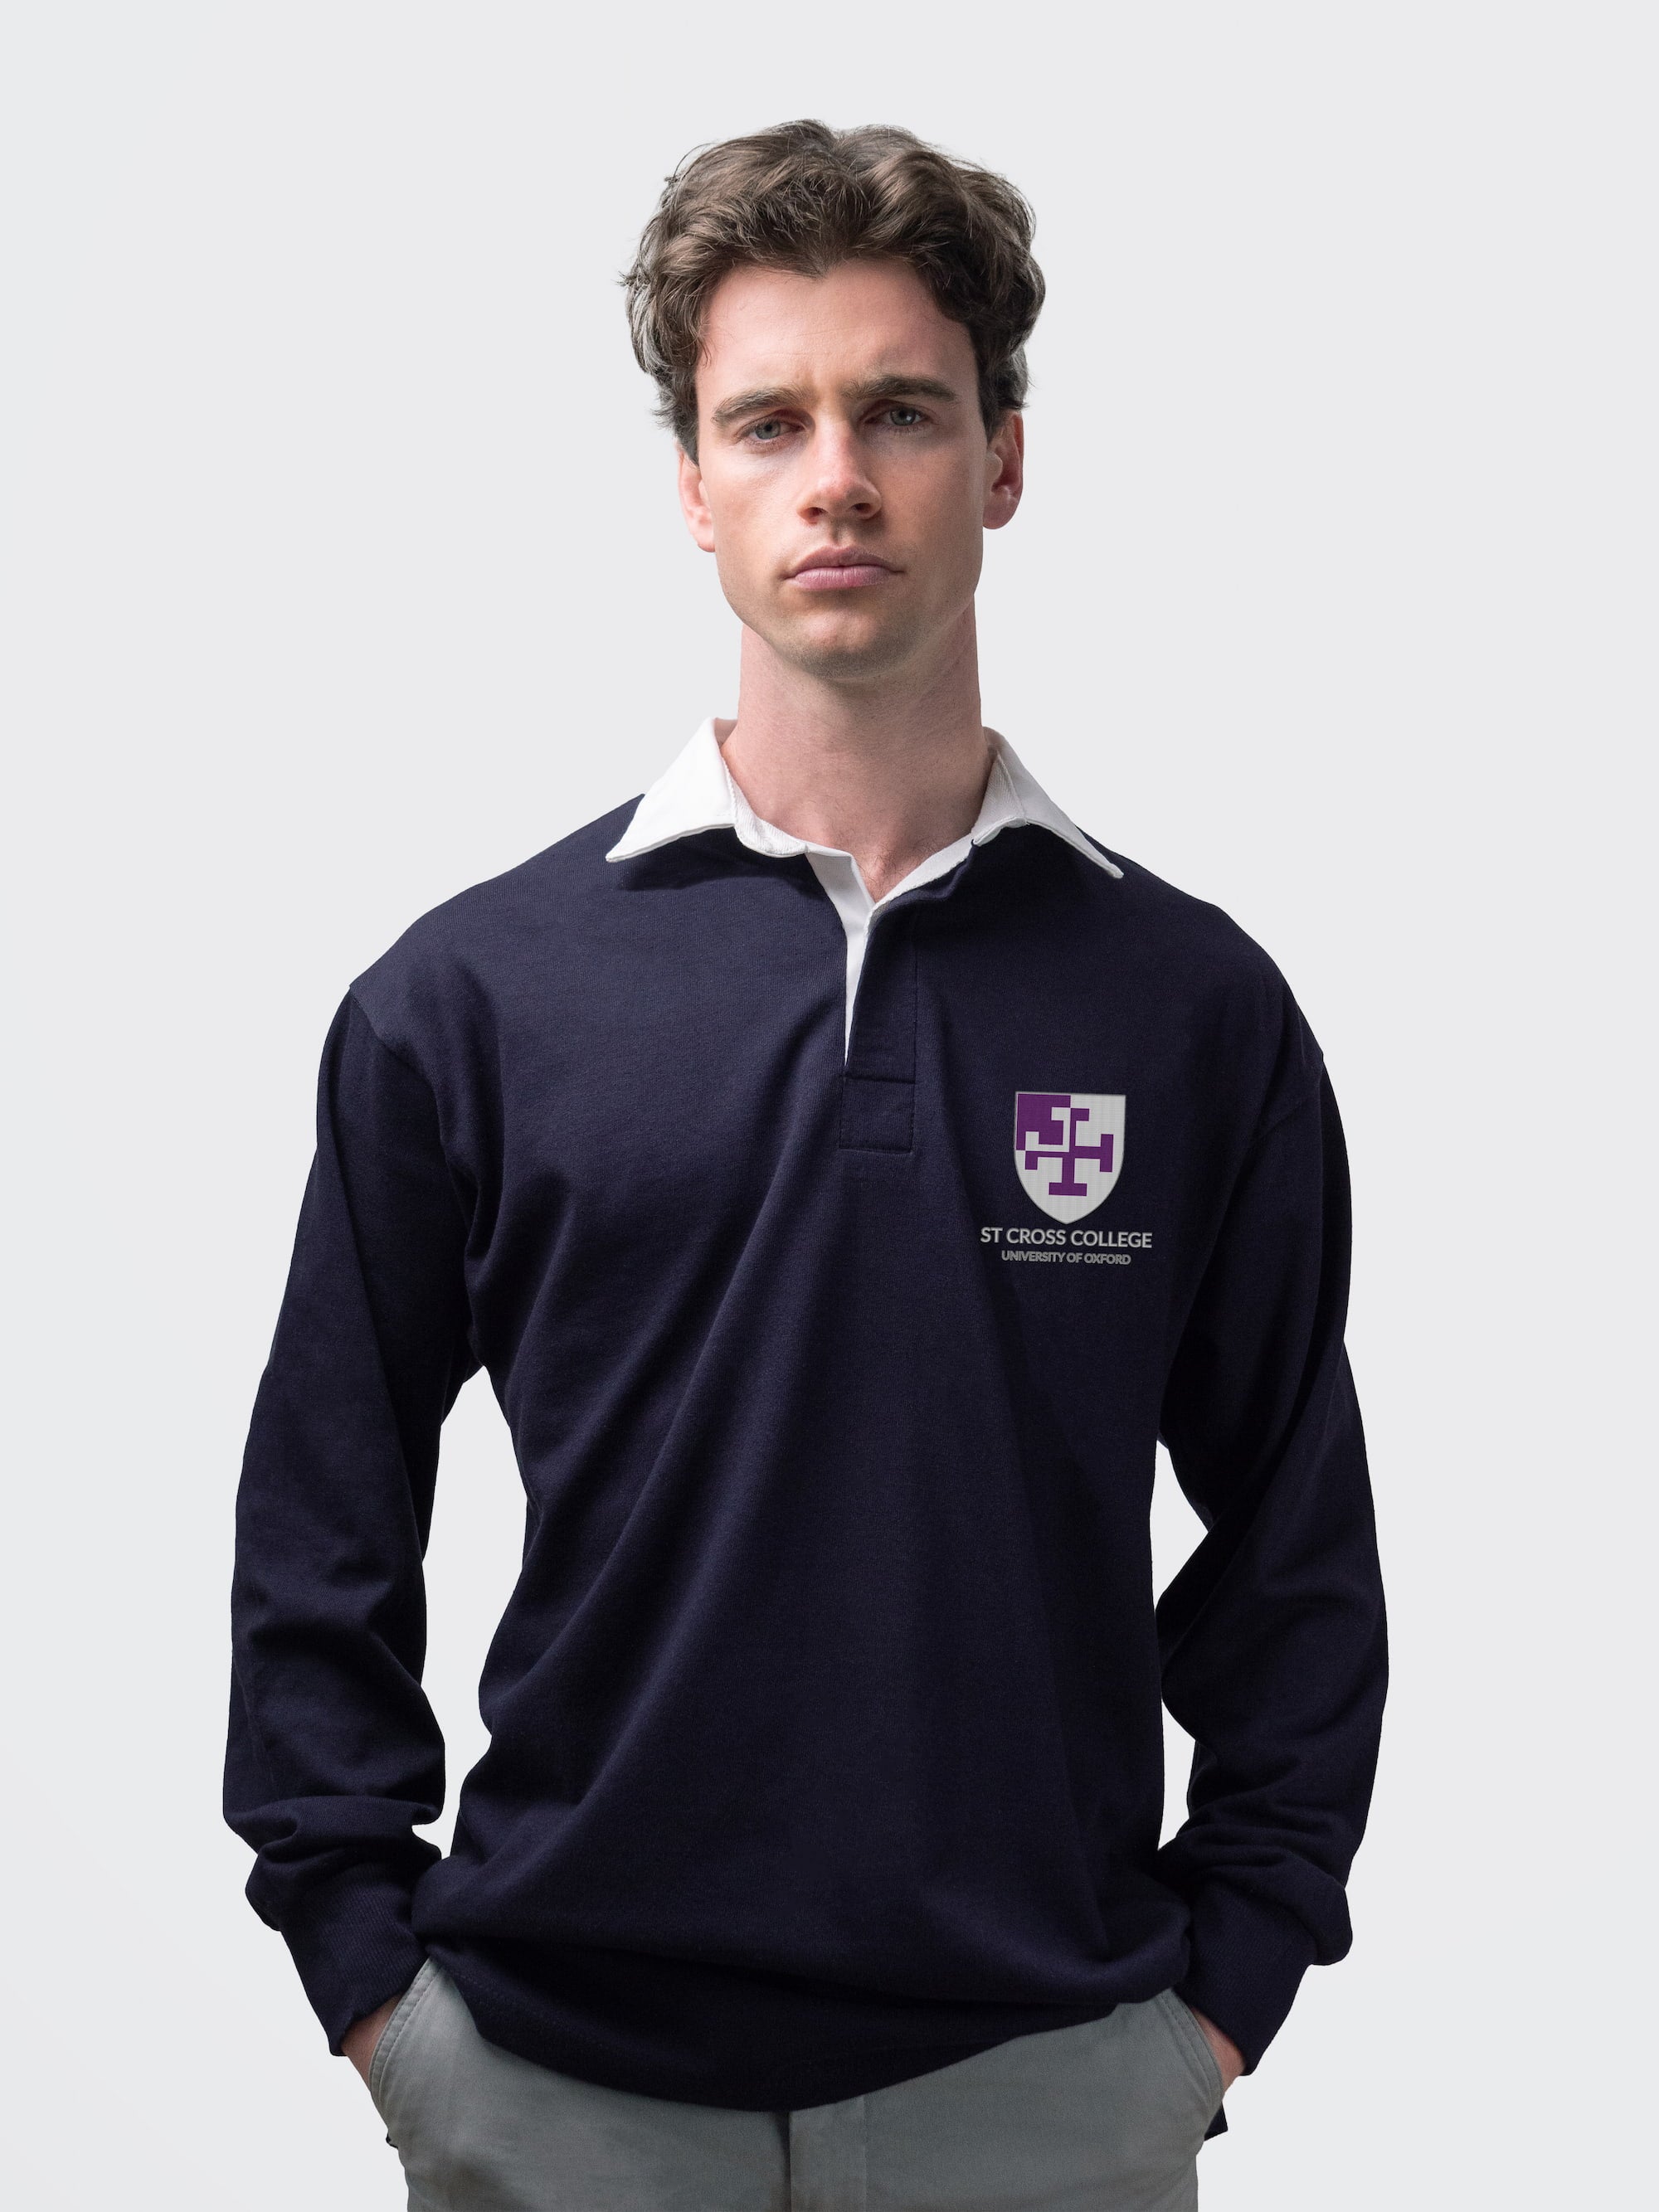 St Cross student wearing an embroidered mens rugby shirt in navy